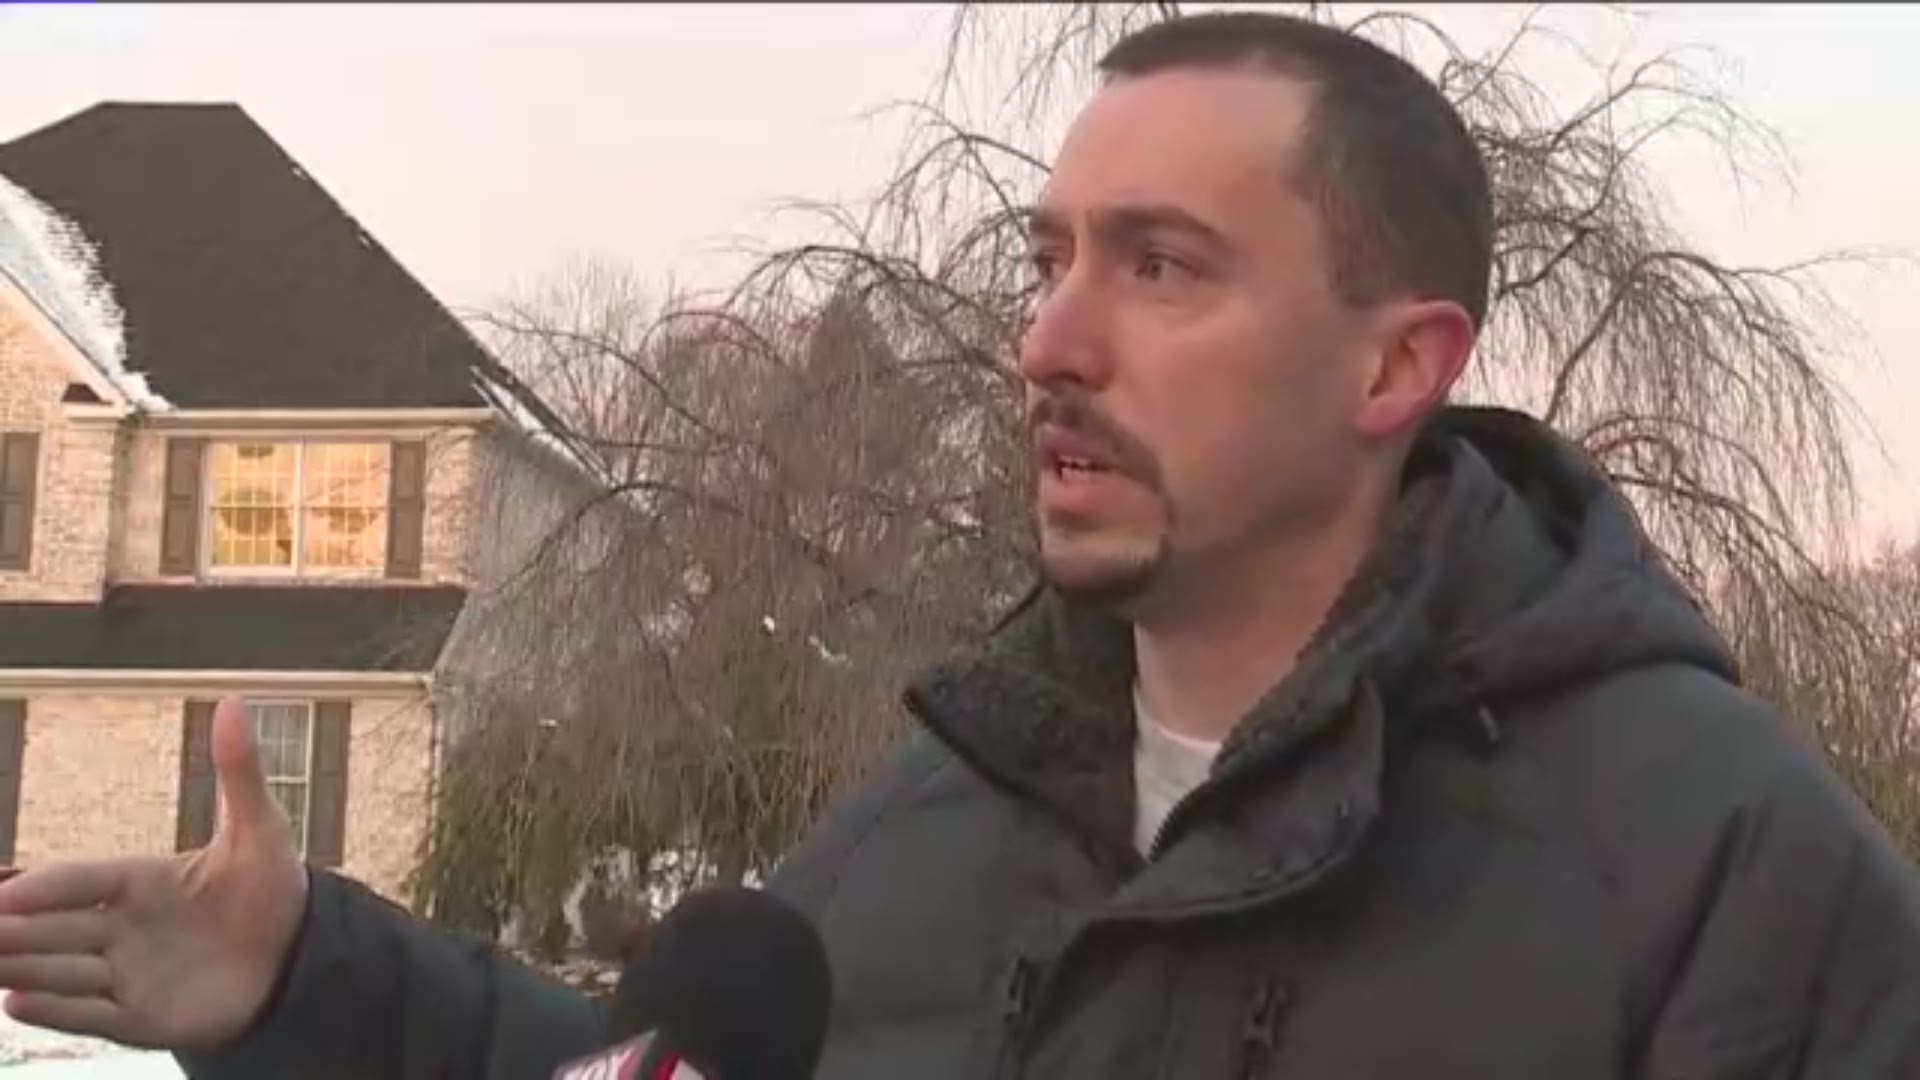 Businessmen Mark Croce & Michael Capriotto were on board the helicopter when it went down in the yard of a home in PA.